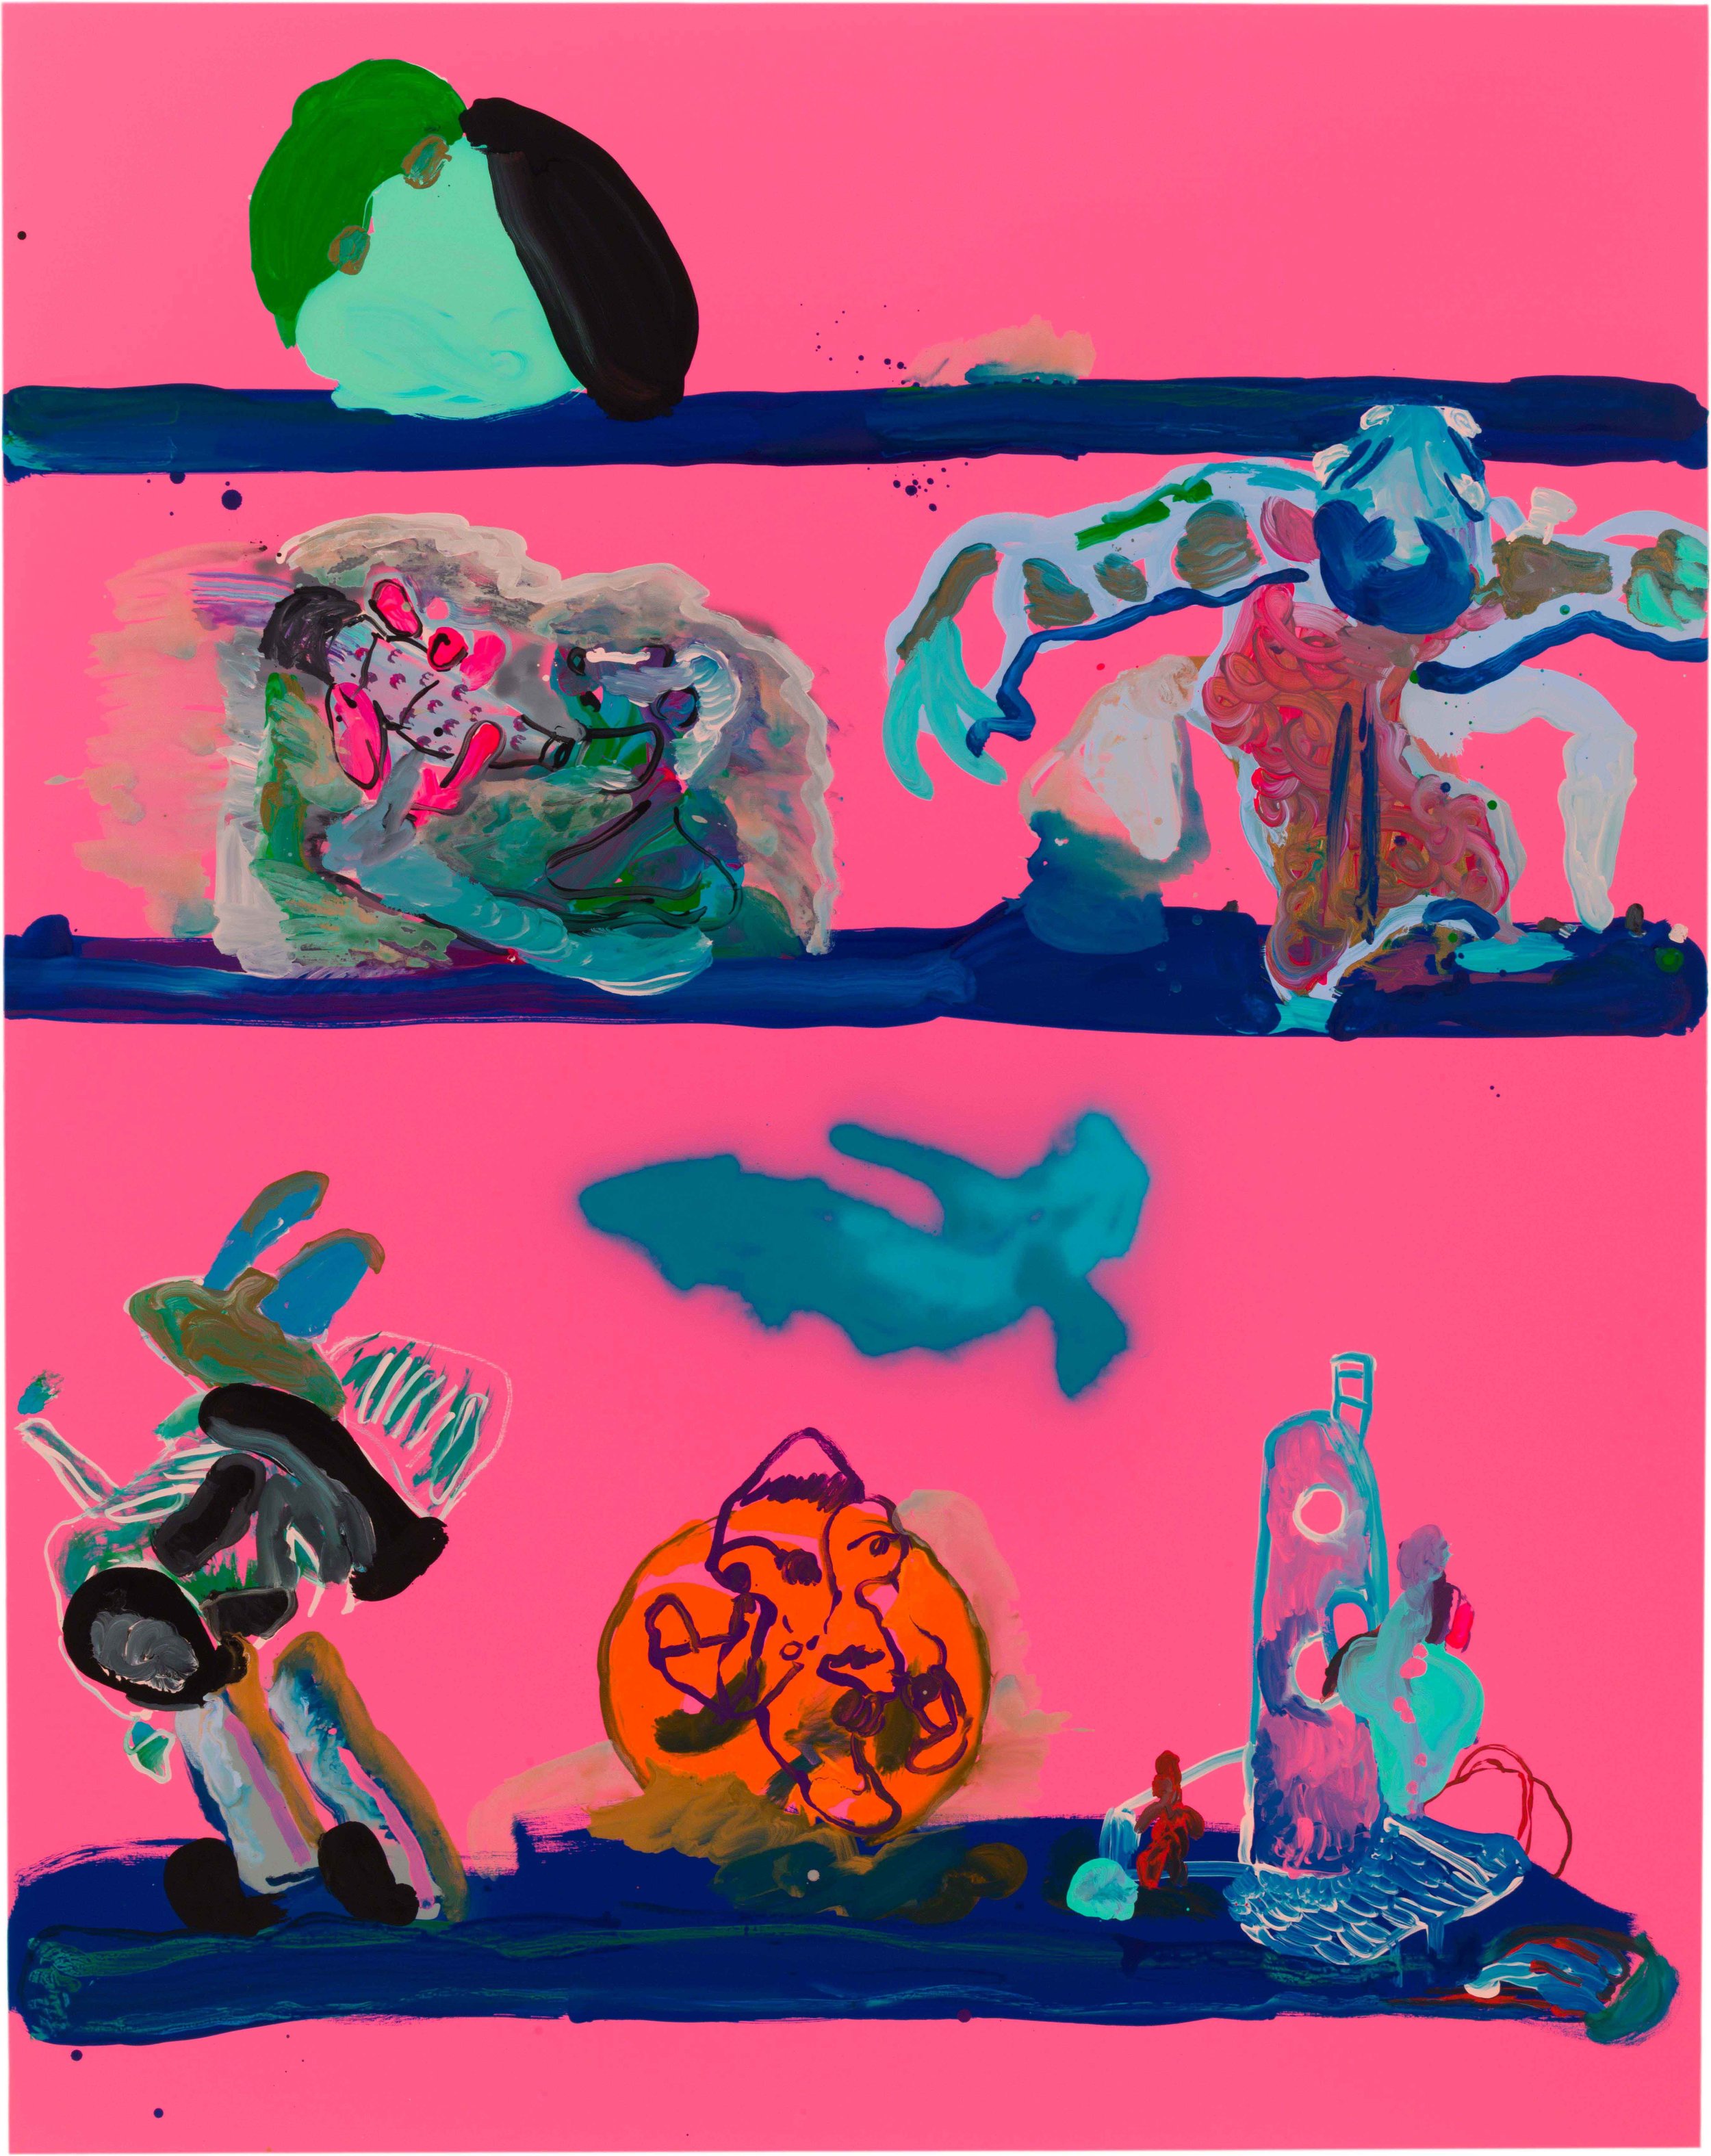  Drew Beattie and Ben Shepard  Shelves on Pink  2014 acrylic and spray paint on canvas 96 x 76 inches 